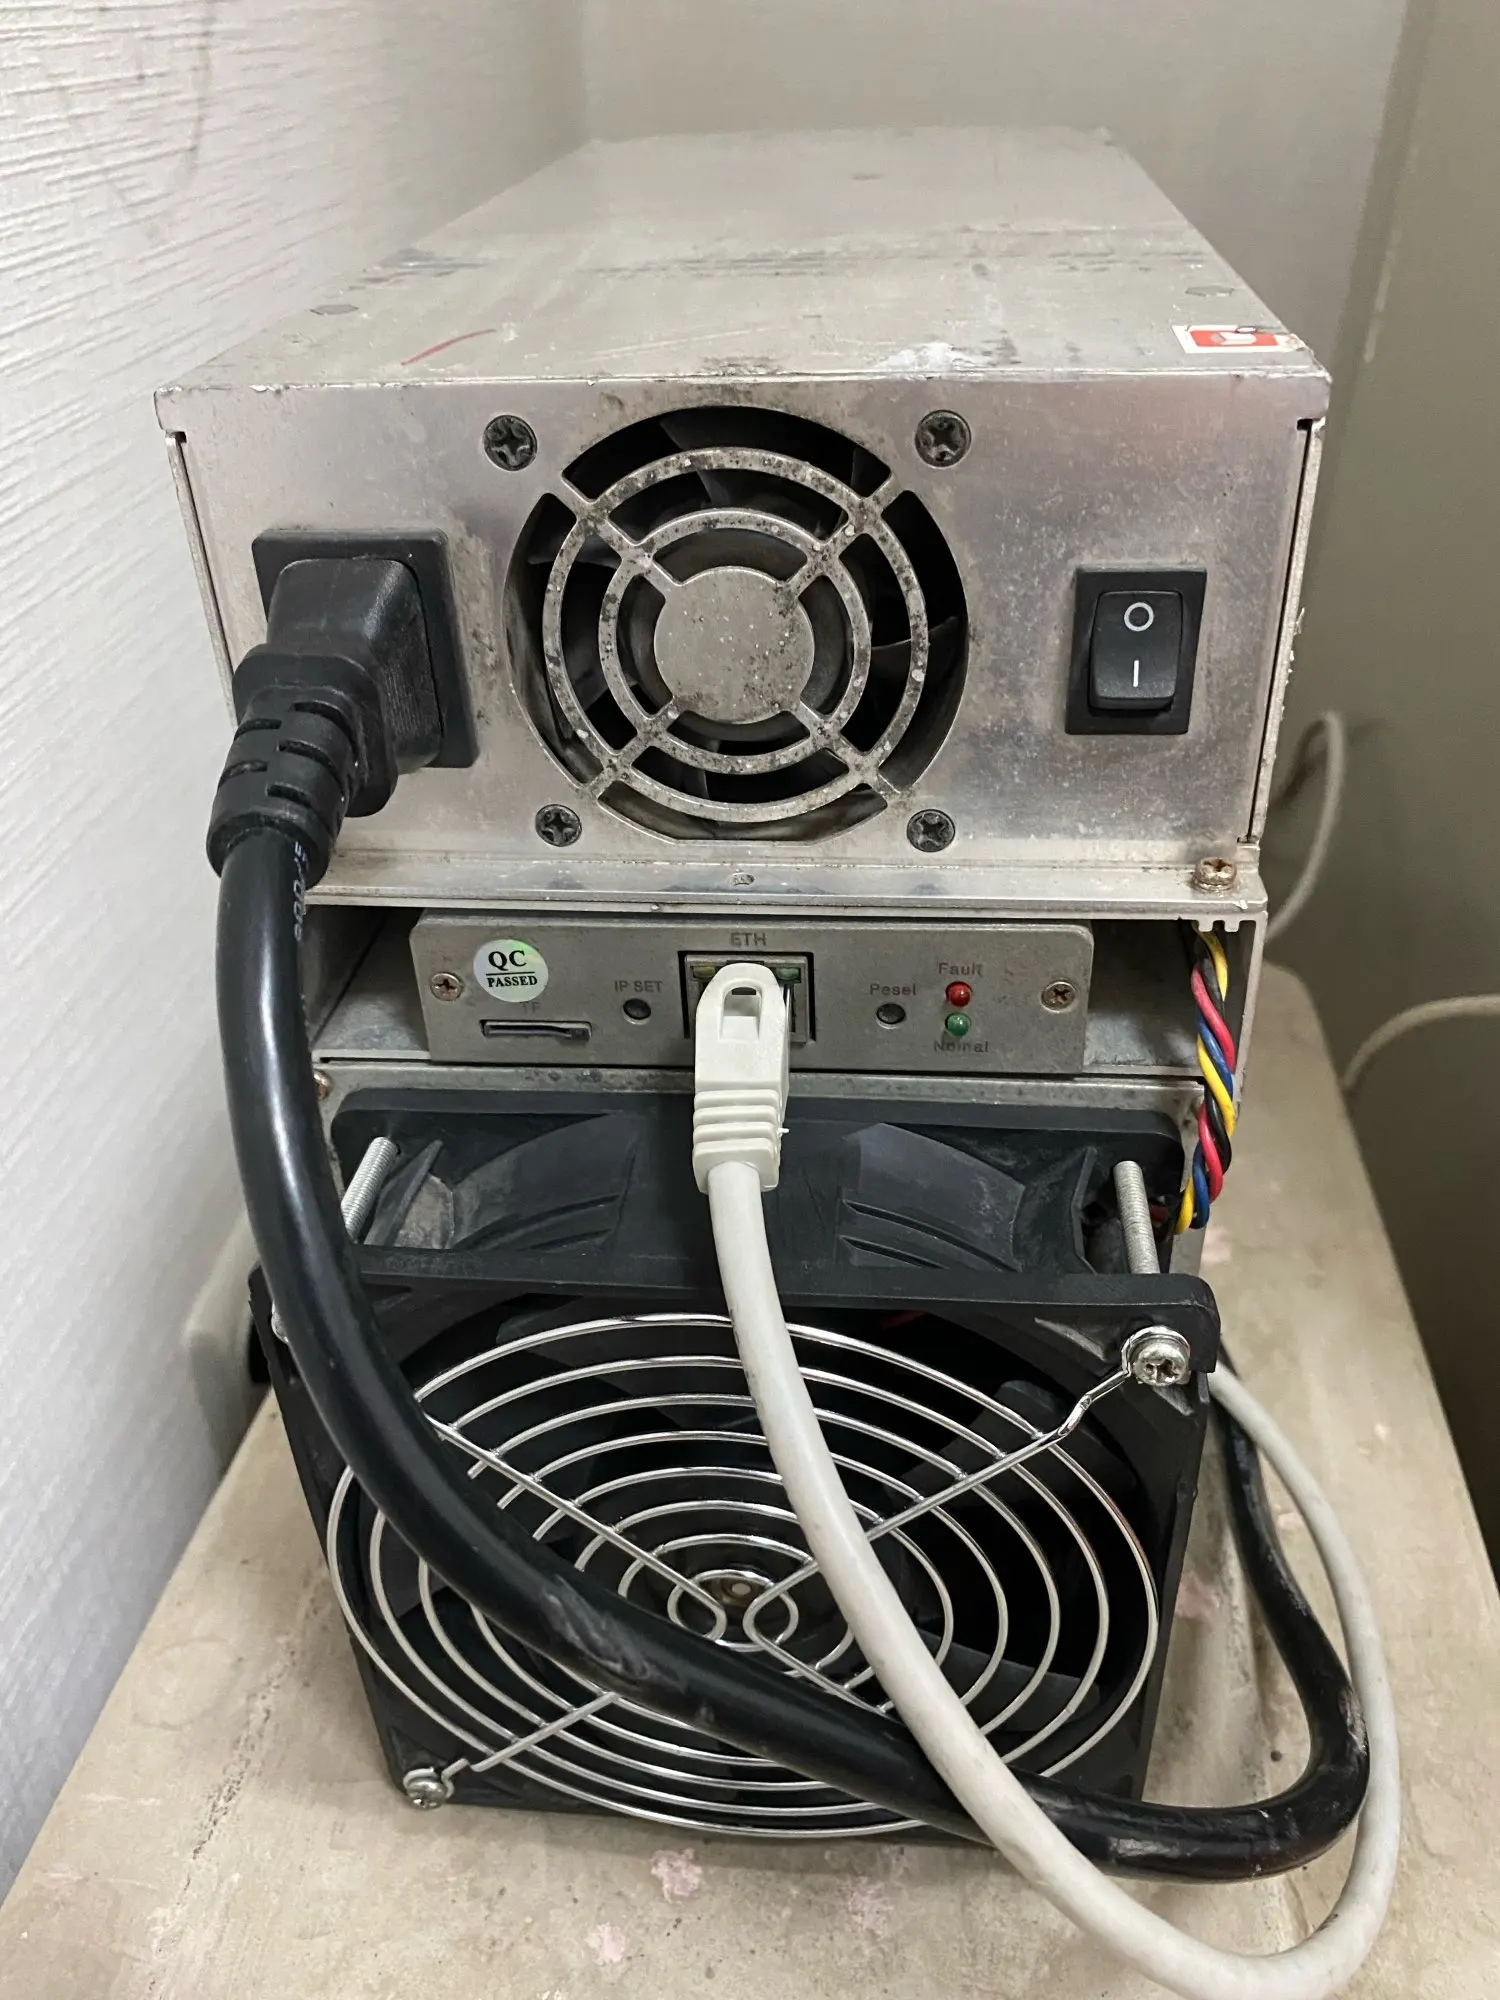 Used Innosilicon T2T 25T Asic Miner Bitcoin BTC Mining Machine With PSU Better Than Antminer S9 S9K S9 SE T9+ S11 T15 S15 L3+ Z9 photo review